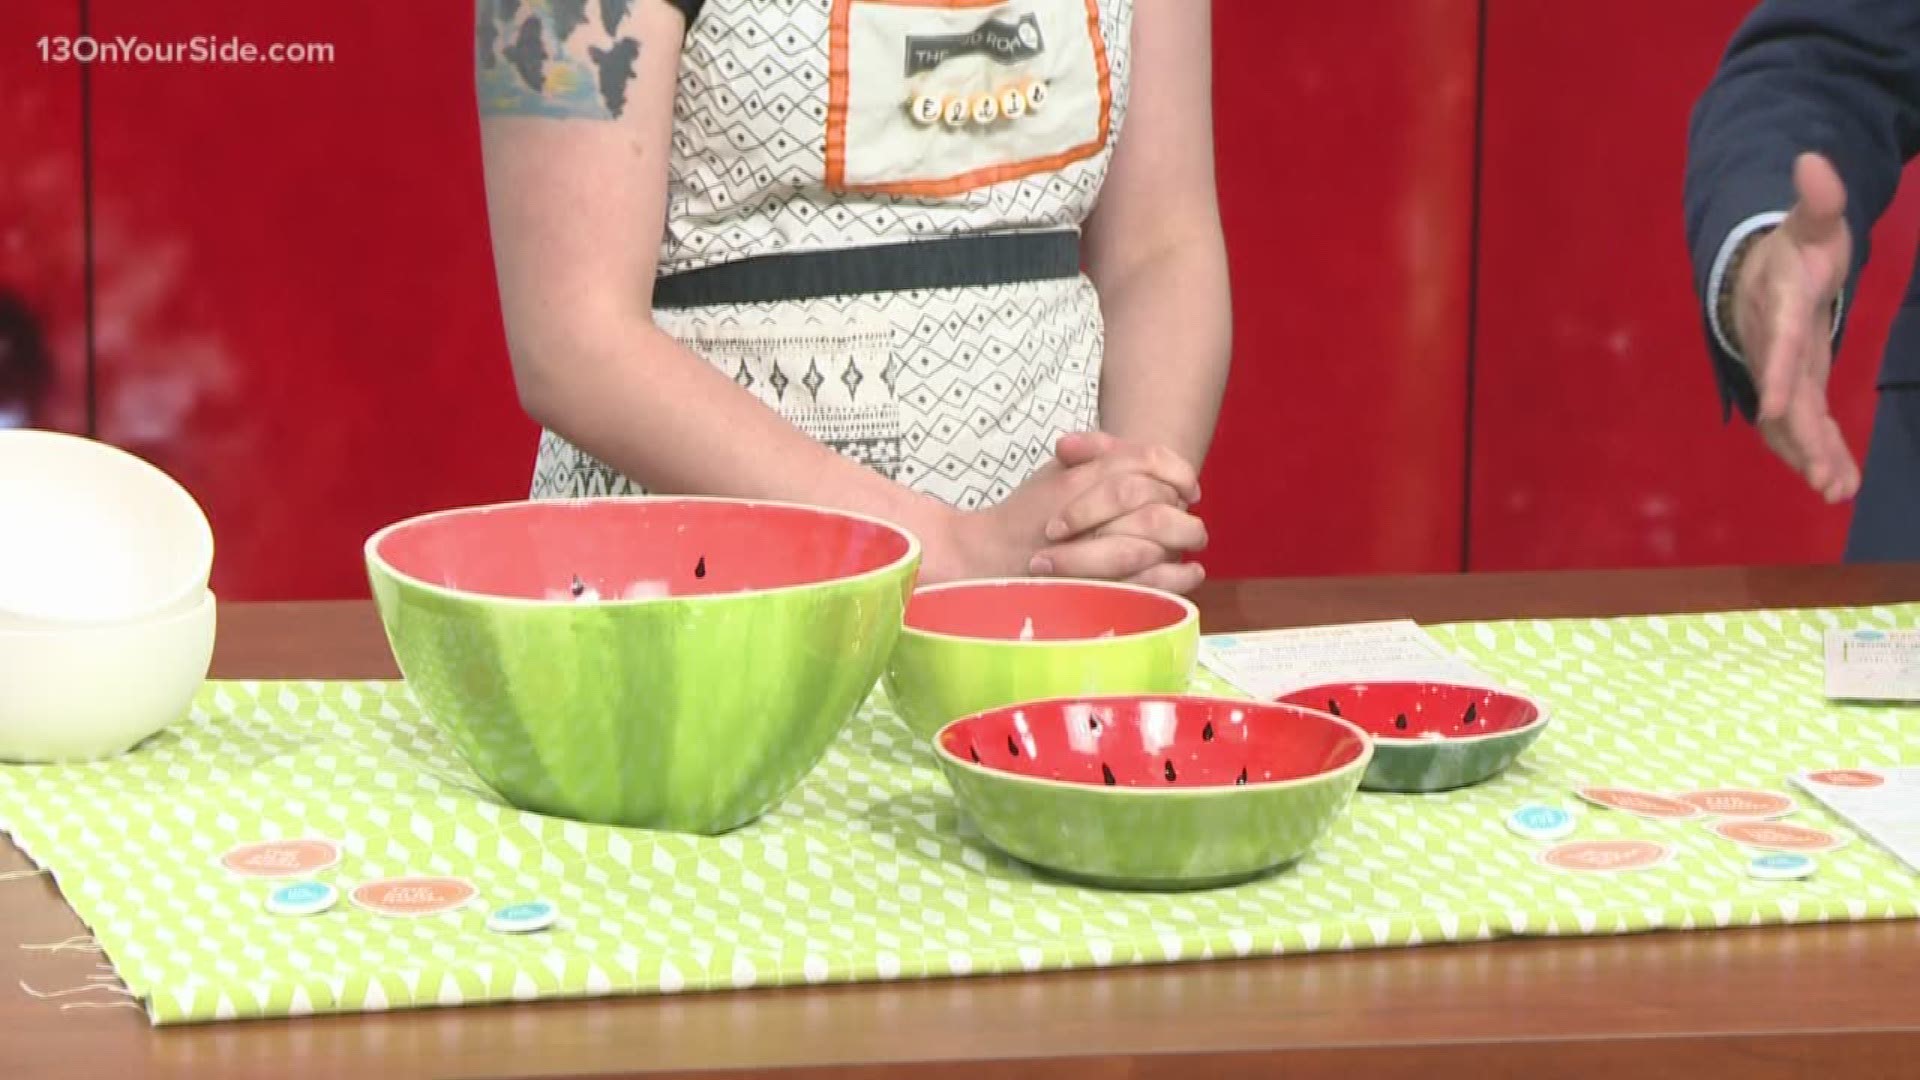 They have a "national day" for just about everything, and Saturday, Aug. 3 is National Watermelon Day. One West Michigan art studio has a great way for you to celebrate.